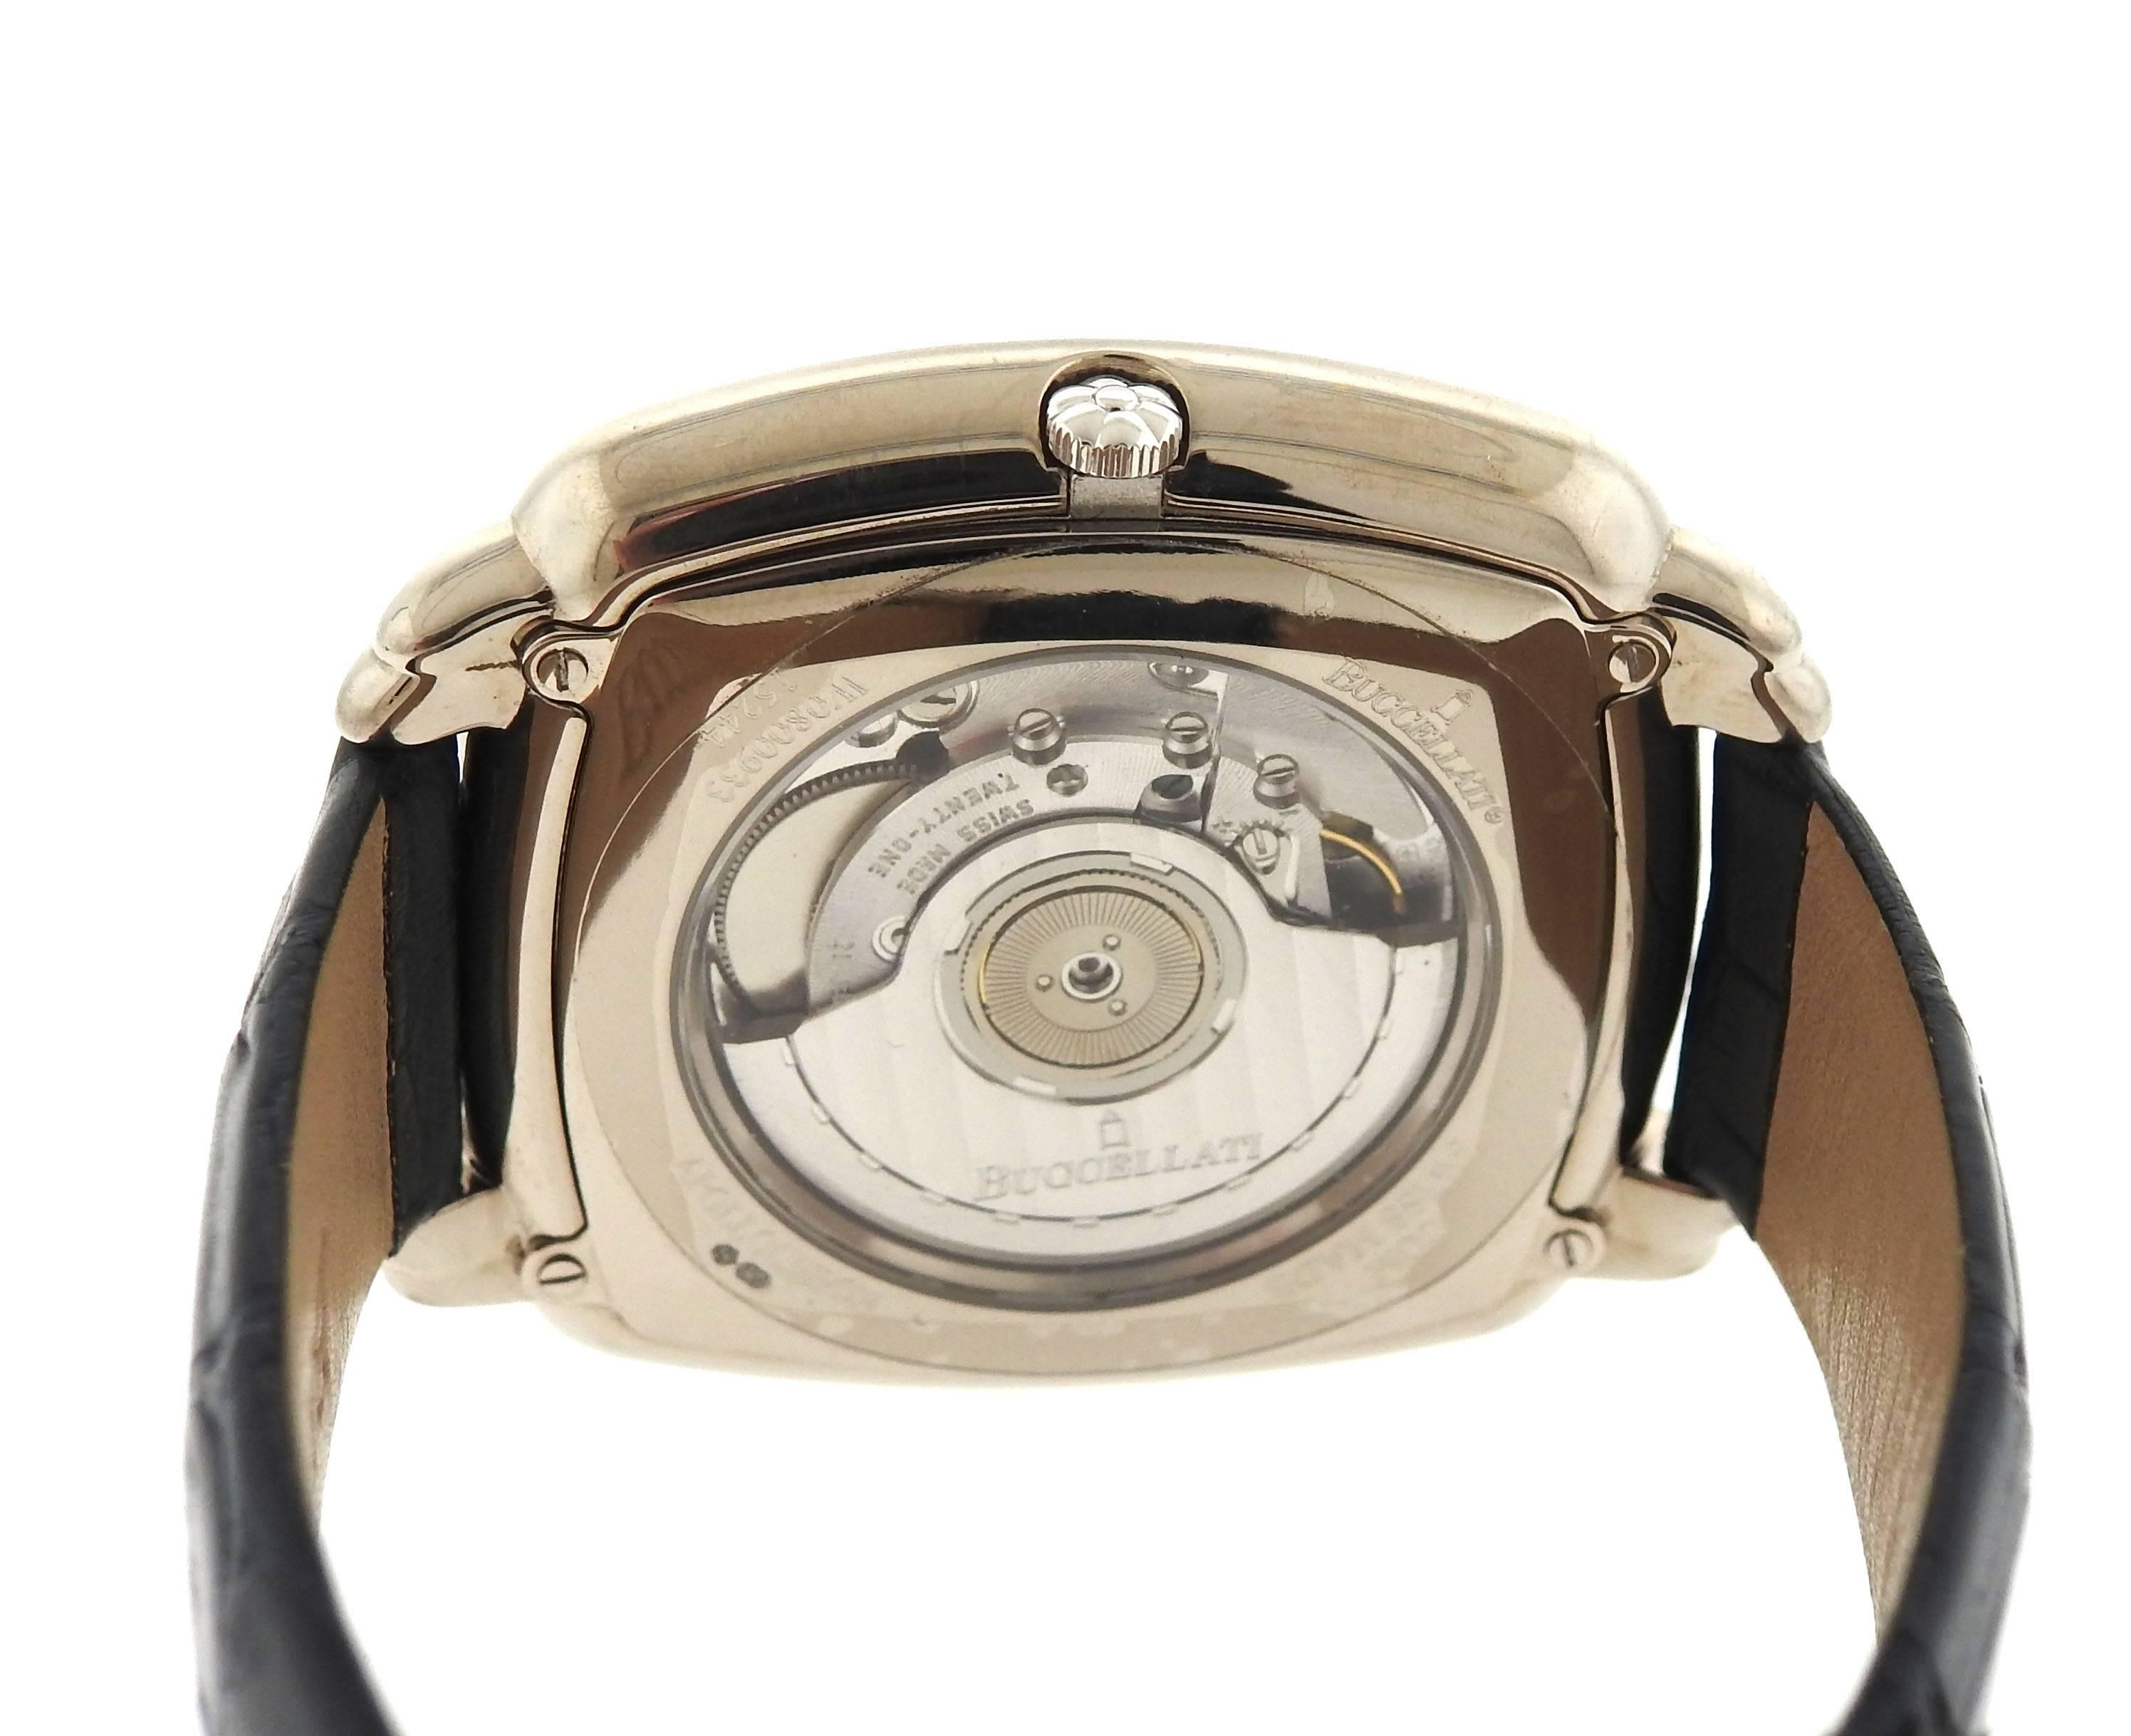 Buccellati Apollochron Gold Dual Time Zone Automatic Power Reserve Watch 1